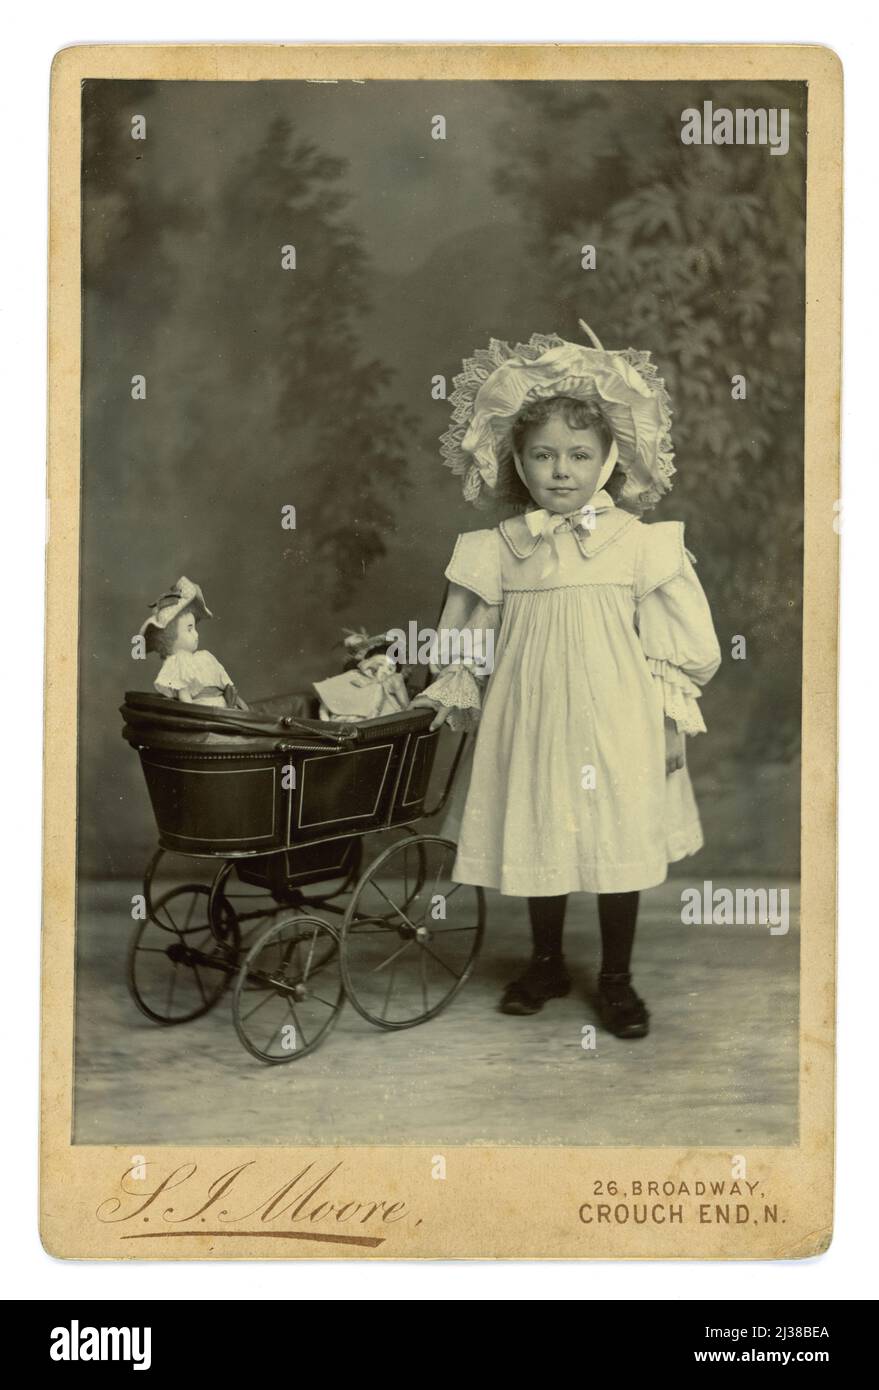 Original, very clear, Edwardian era cabinet card of adorable cute young Edwardian or Victorian girl from a wealthy middle class London family, standing with her dolls pram, wearing a white bonnet and frock, from the studio of  S. J. Moore 26 Broadway, Crouch End, N. London, circa 1904 Stock Photo